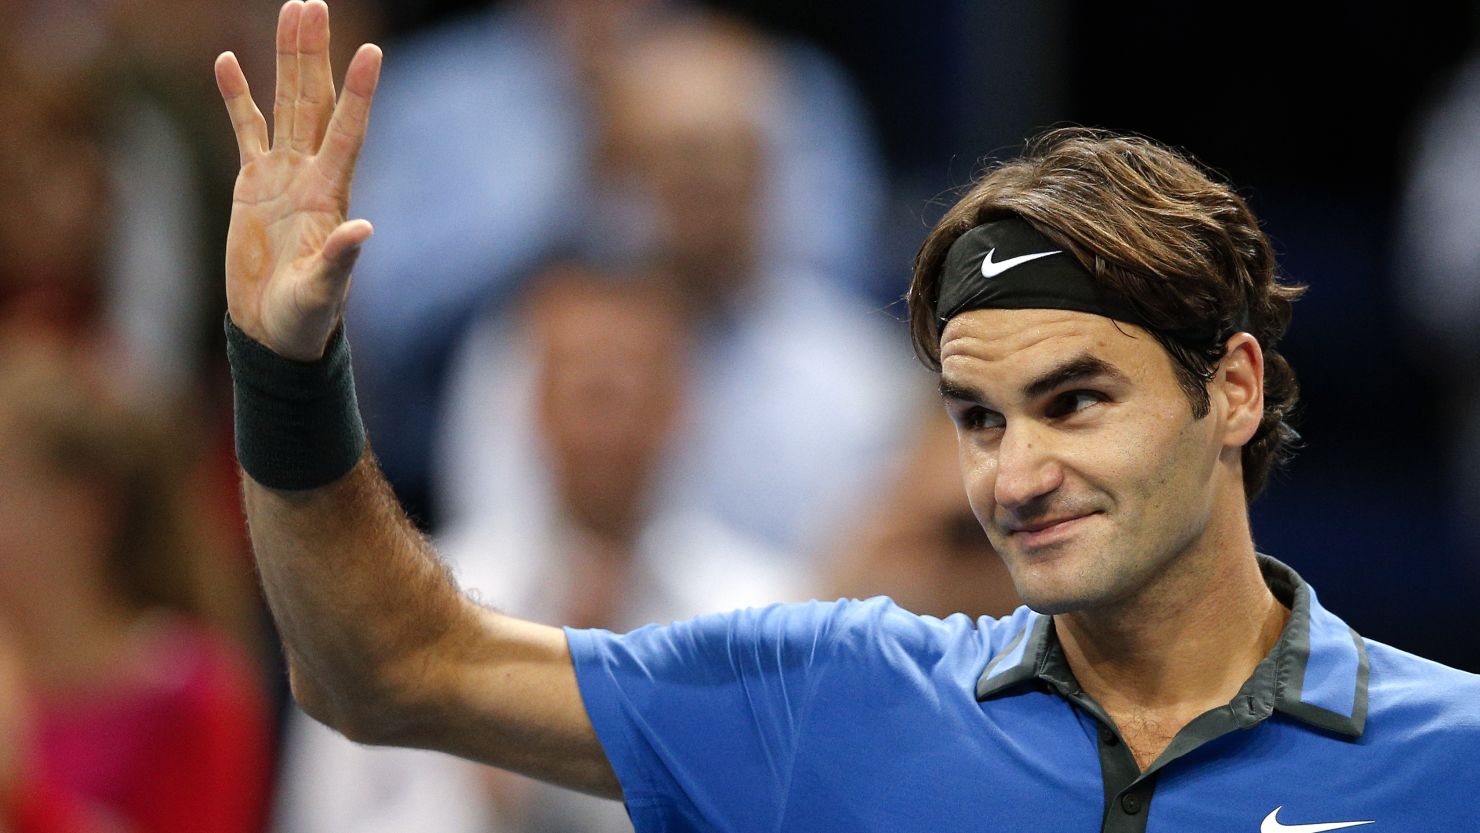 Roger Federer has pulled out of the Paris Masters meaning he will not end the year as world No. 1